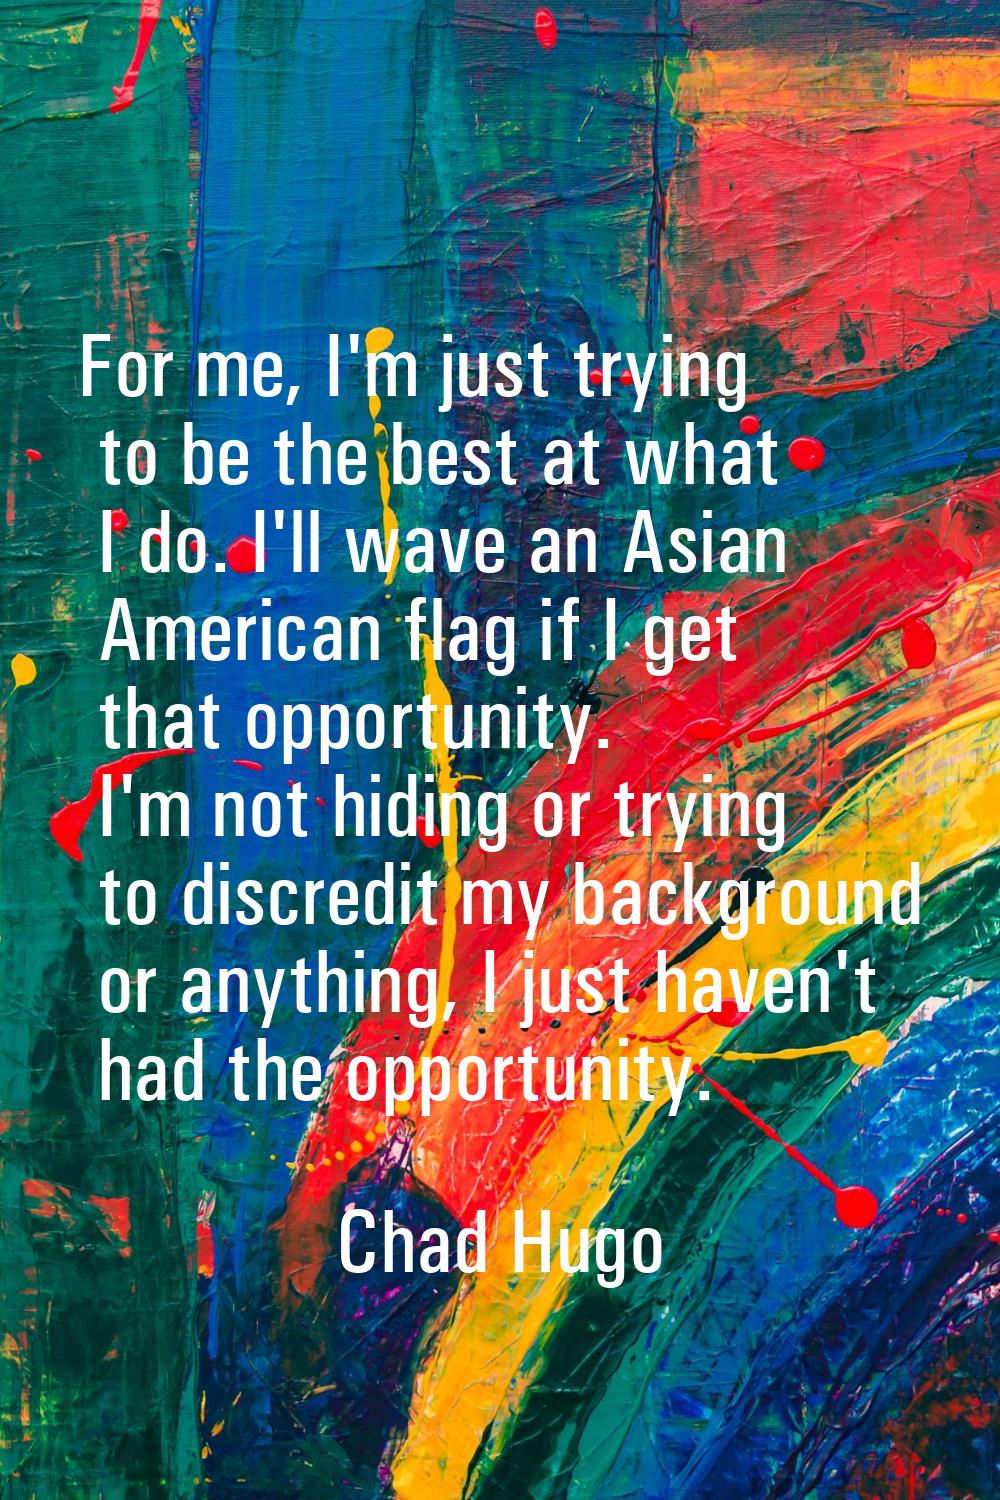 For me, I'm just trying to be the best at what I do. I'll wave an Asian American flag if I get that